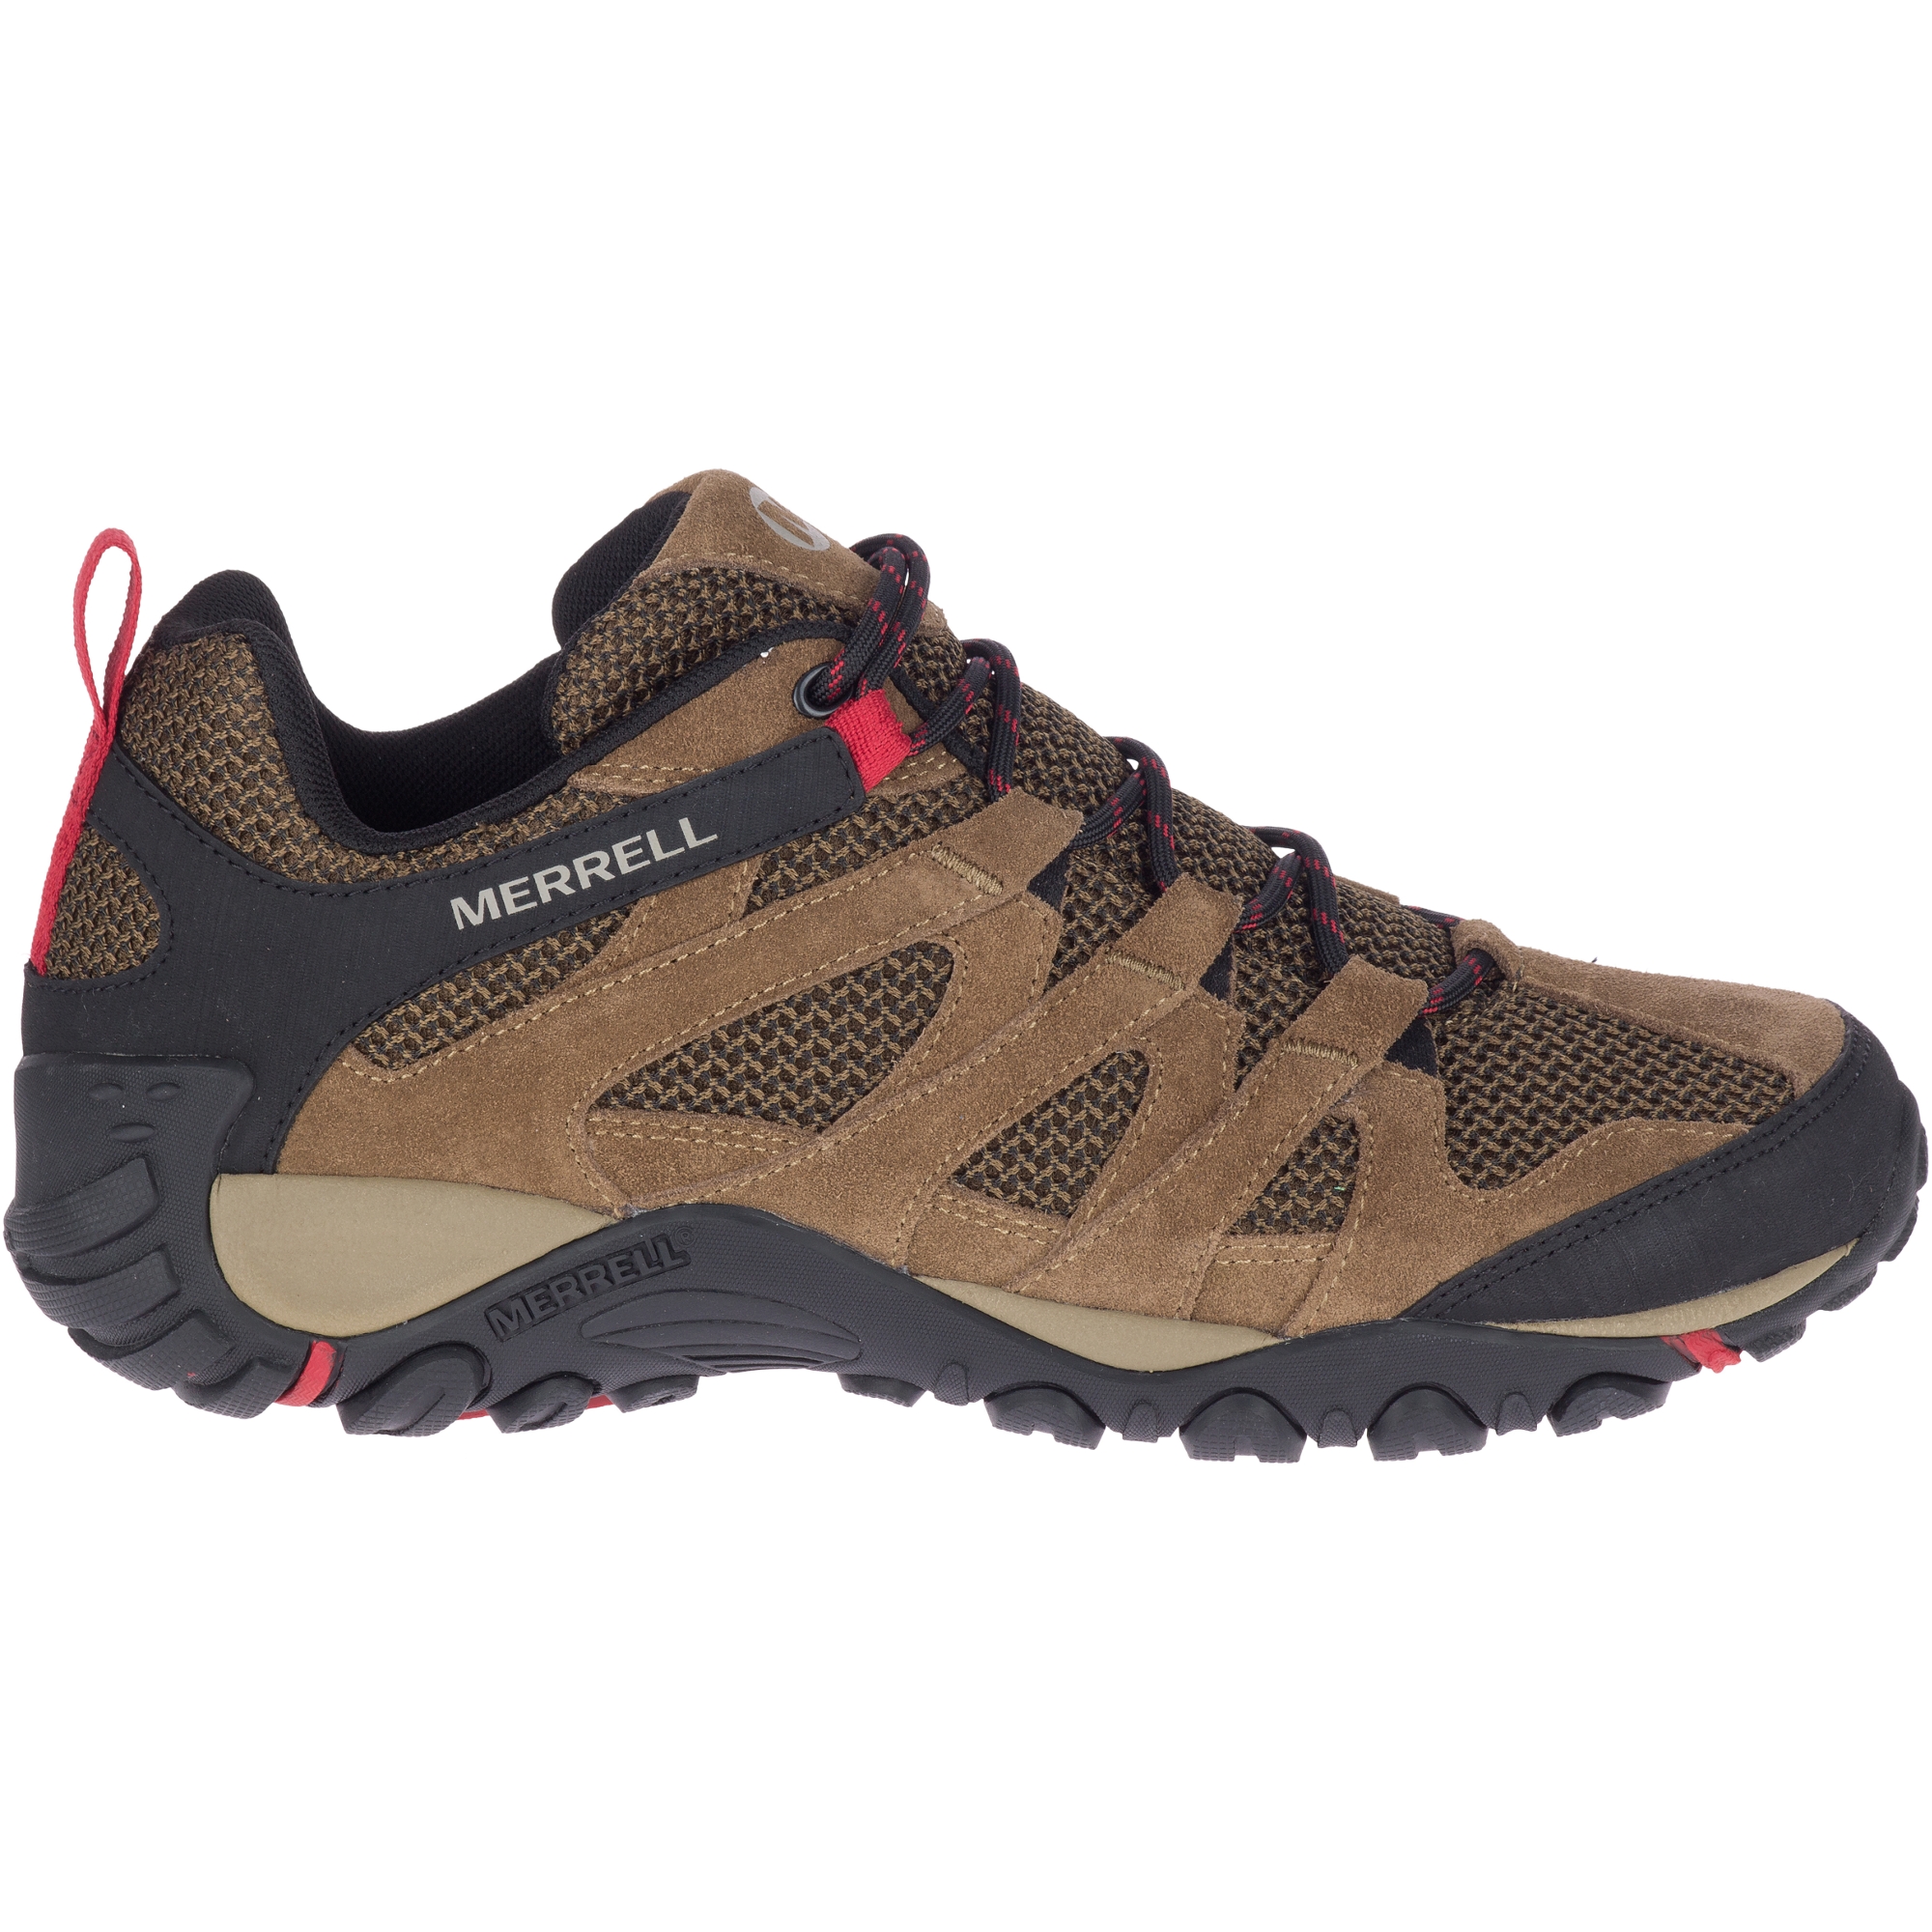 Merrell Men Alverstone Hiking Shoes Suede,Leather-And-Mesh